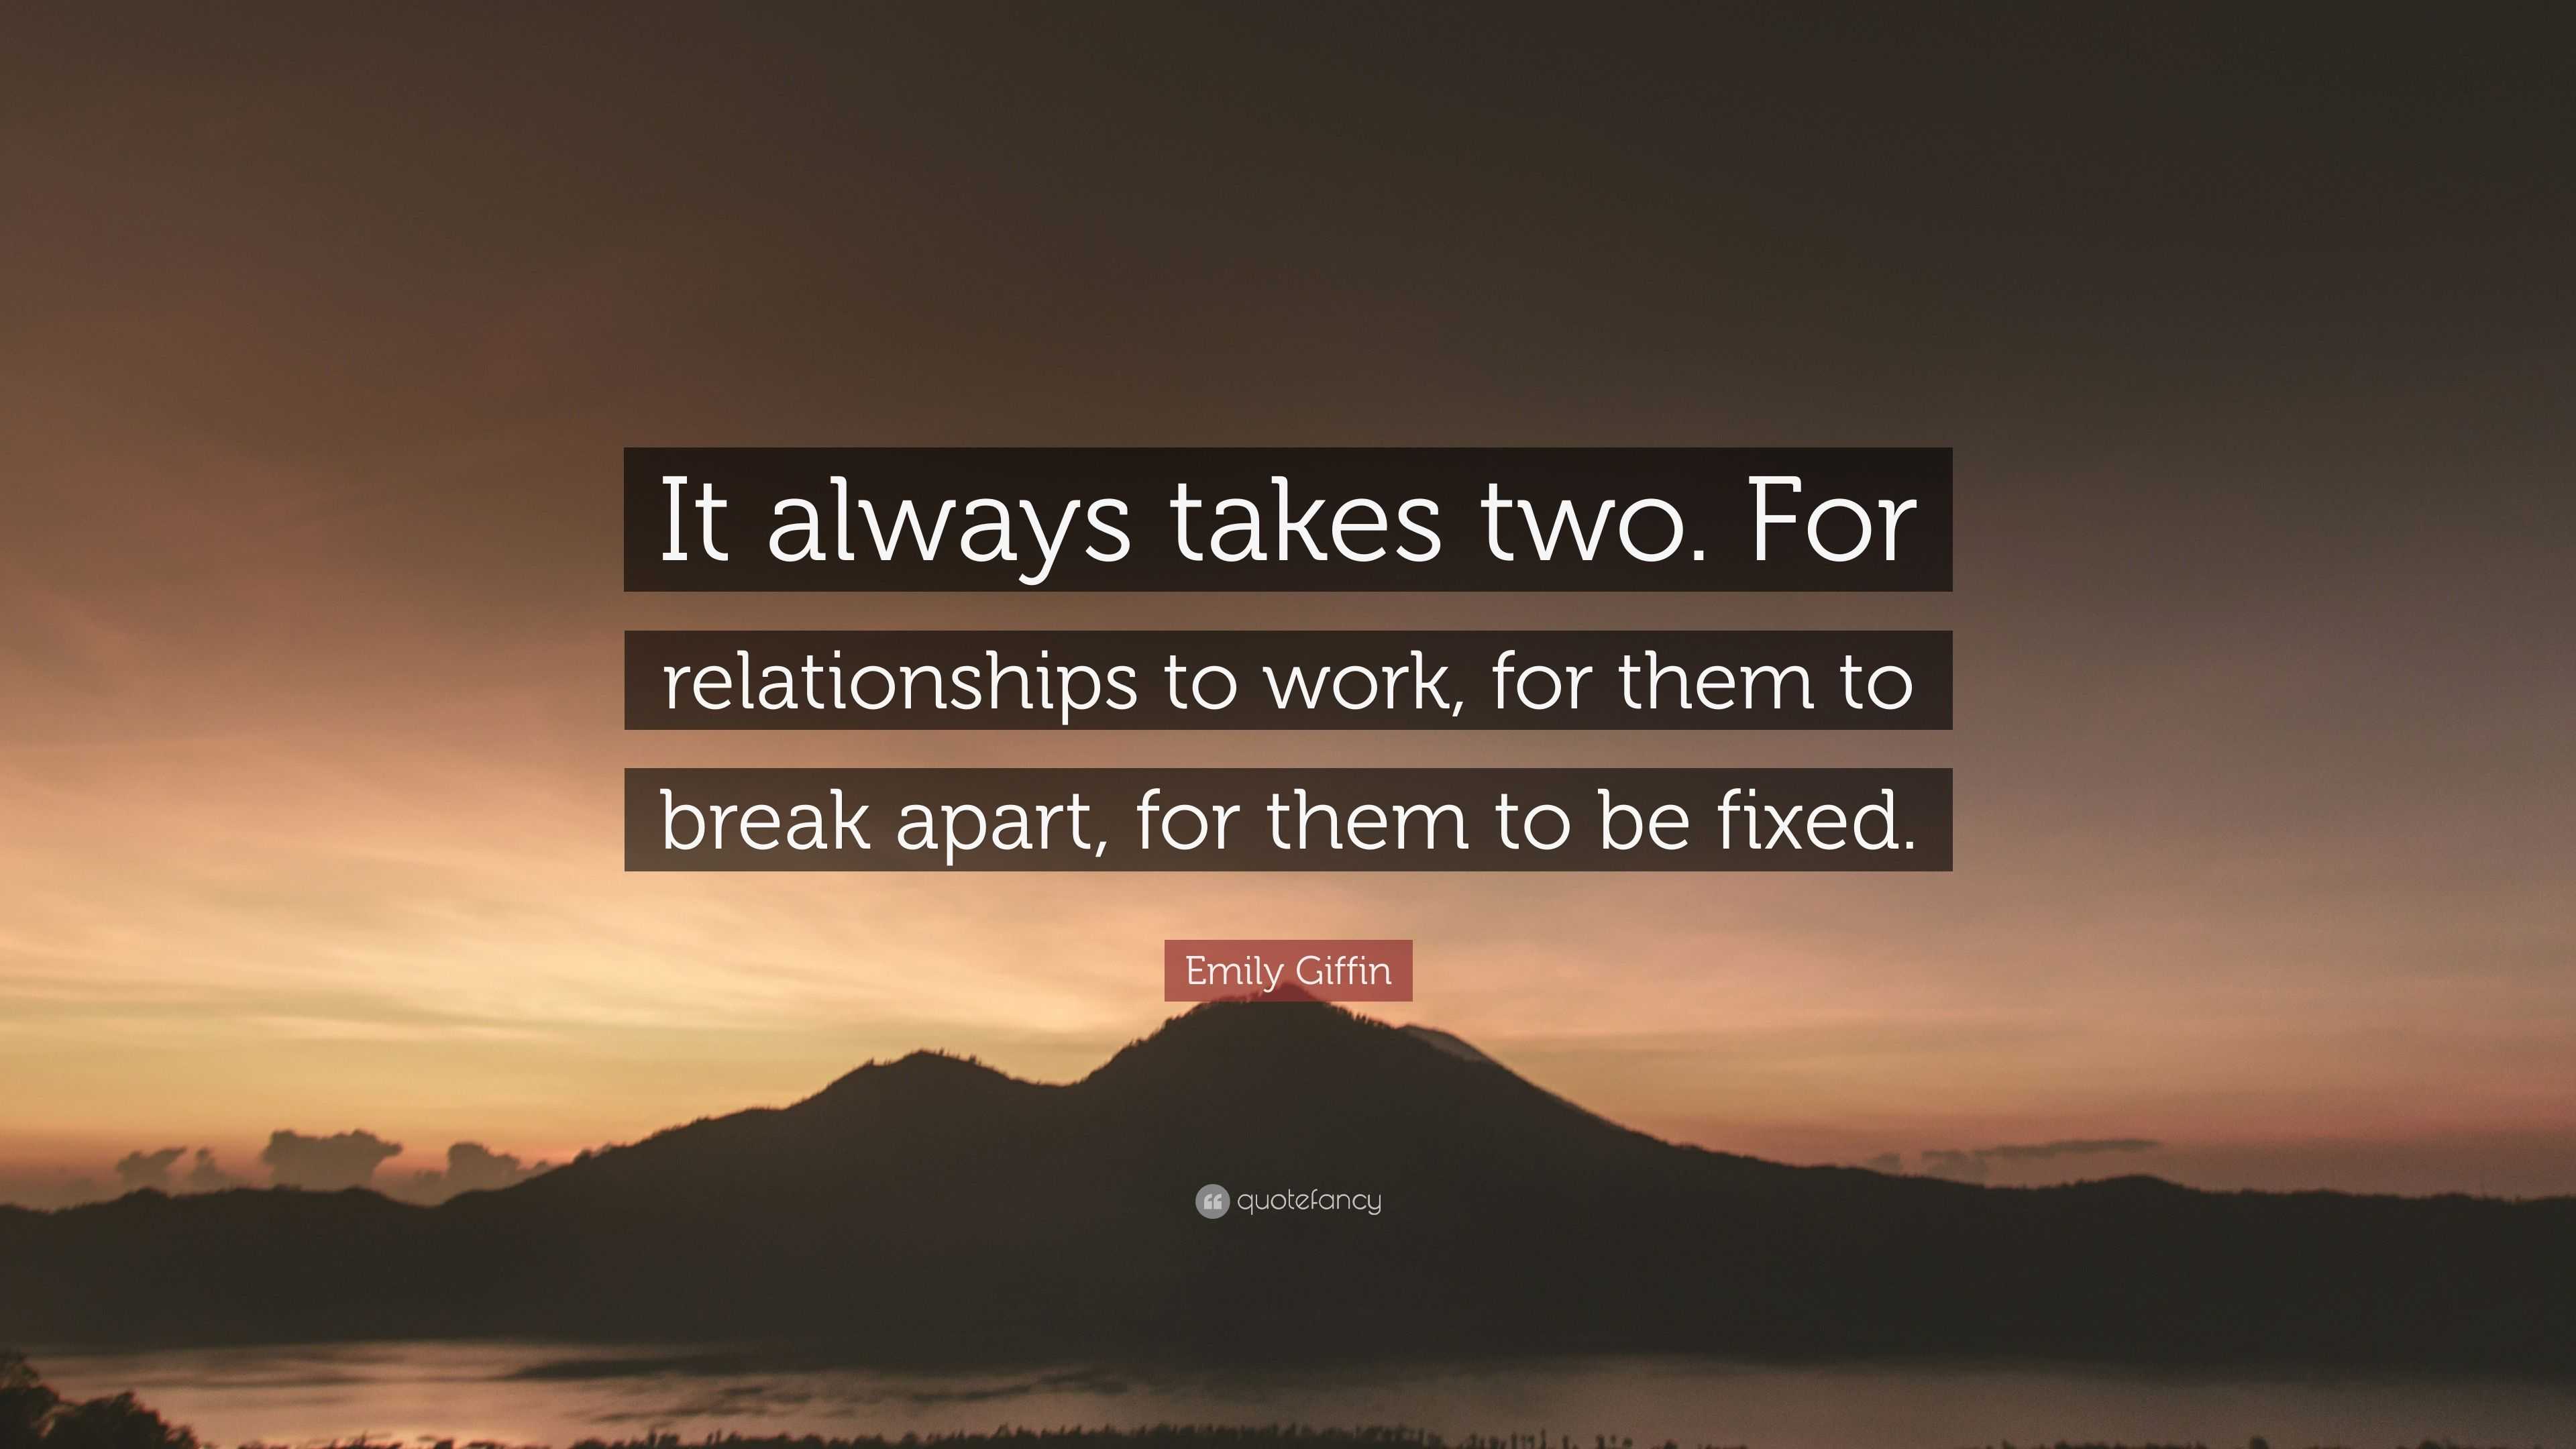 taking a break quotes in relationships